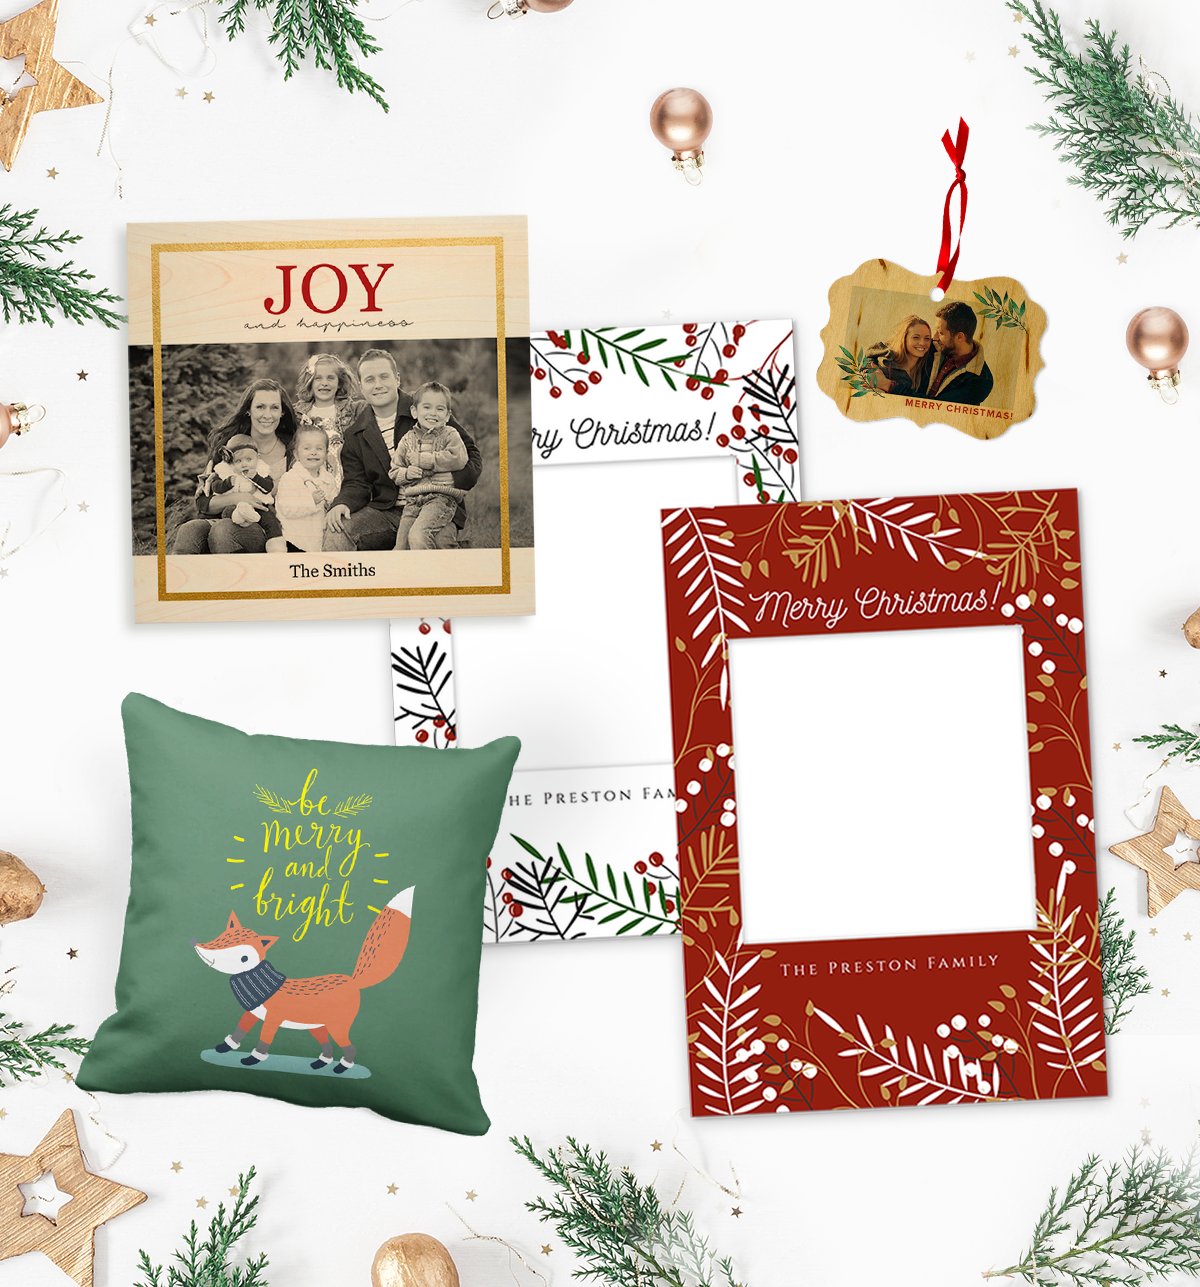 Photobook's Christmas products.